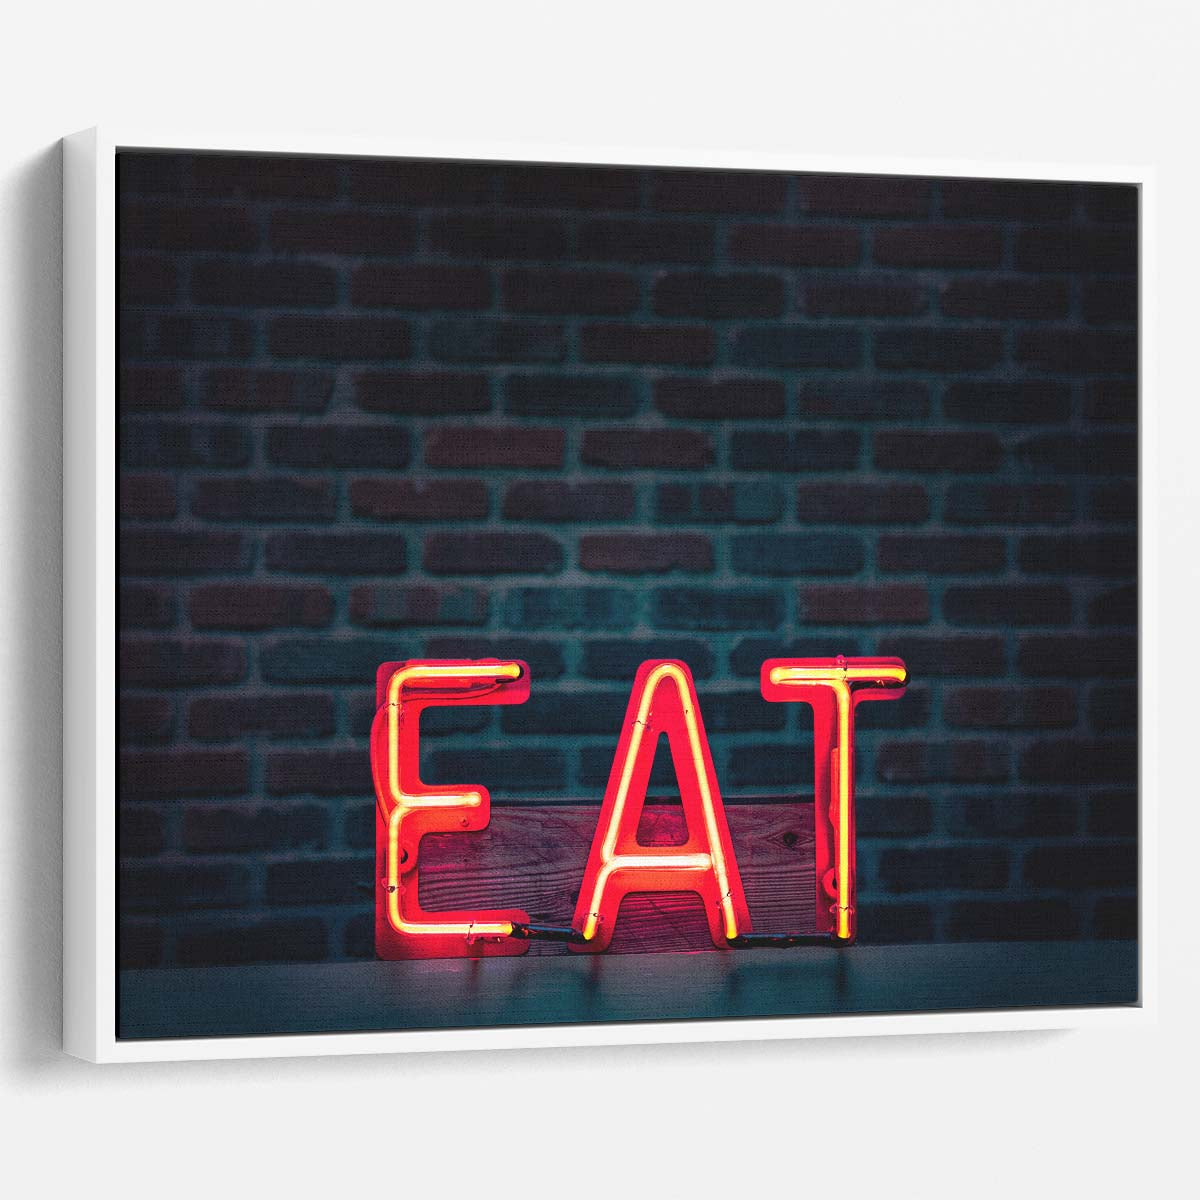 Red Neon 'EAT' Typography Brick Wall Art Sign by Luxuriance Designs. Made in USA.